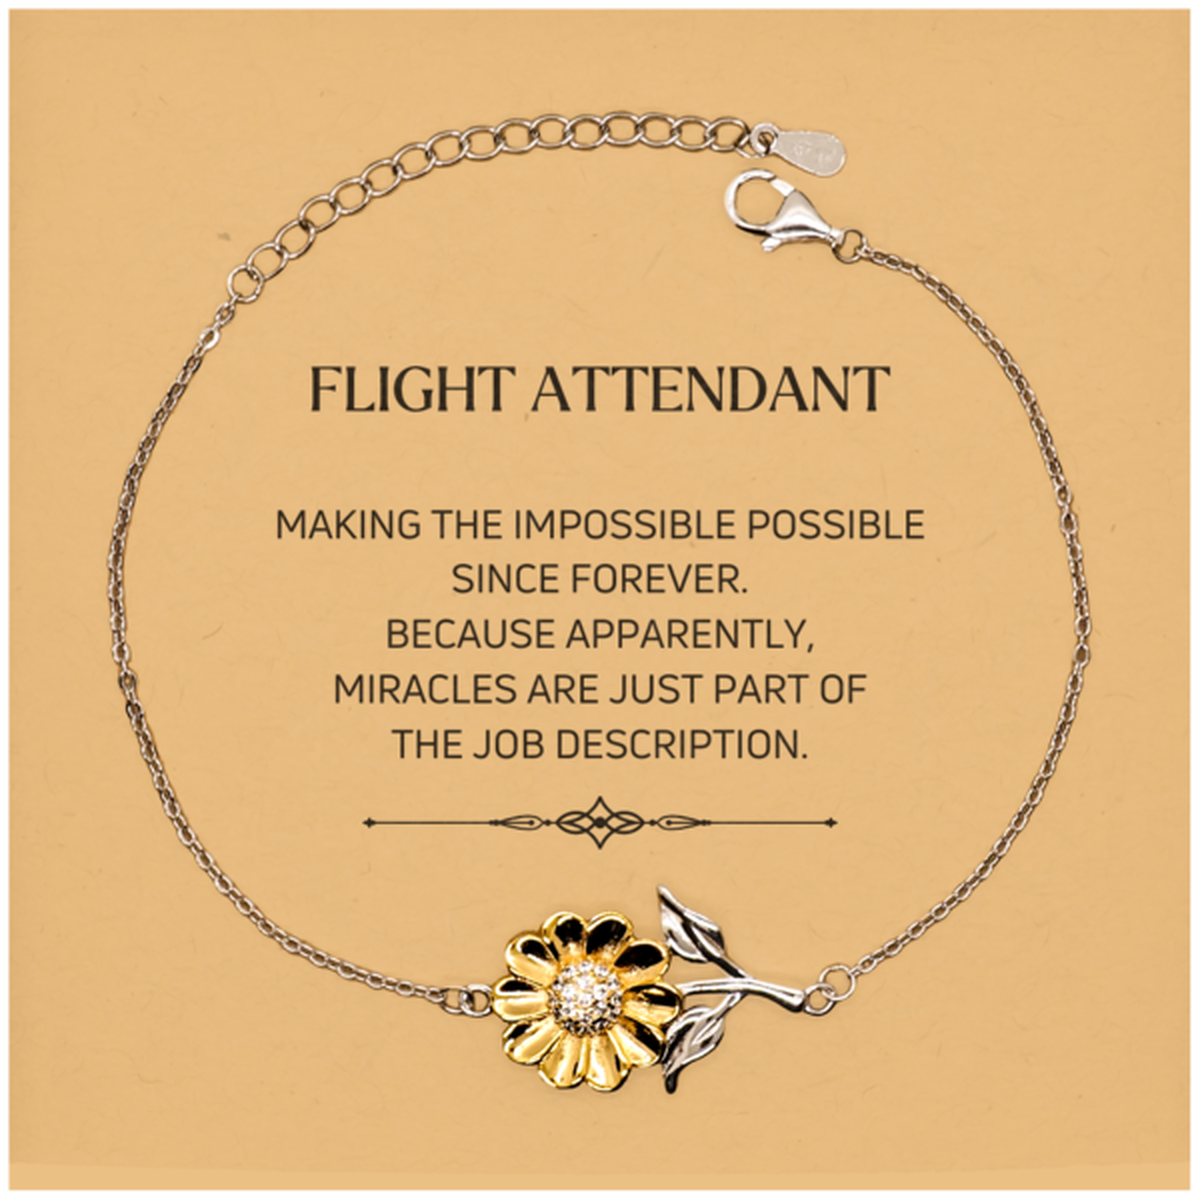 Funny Flight Attendant Gifts, Miracles are just part of the job description, Inspirational Birthday Christmas Sunflower Bracelet For Flight Attendant, Men, Women, Coworkers, Friends, Boss